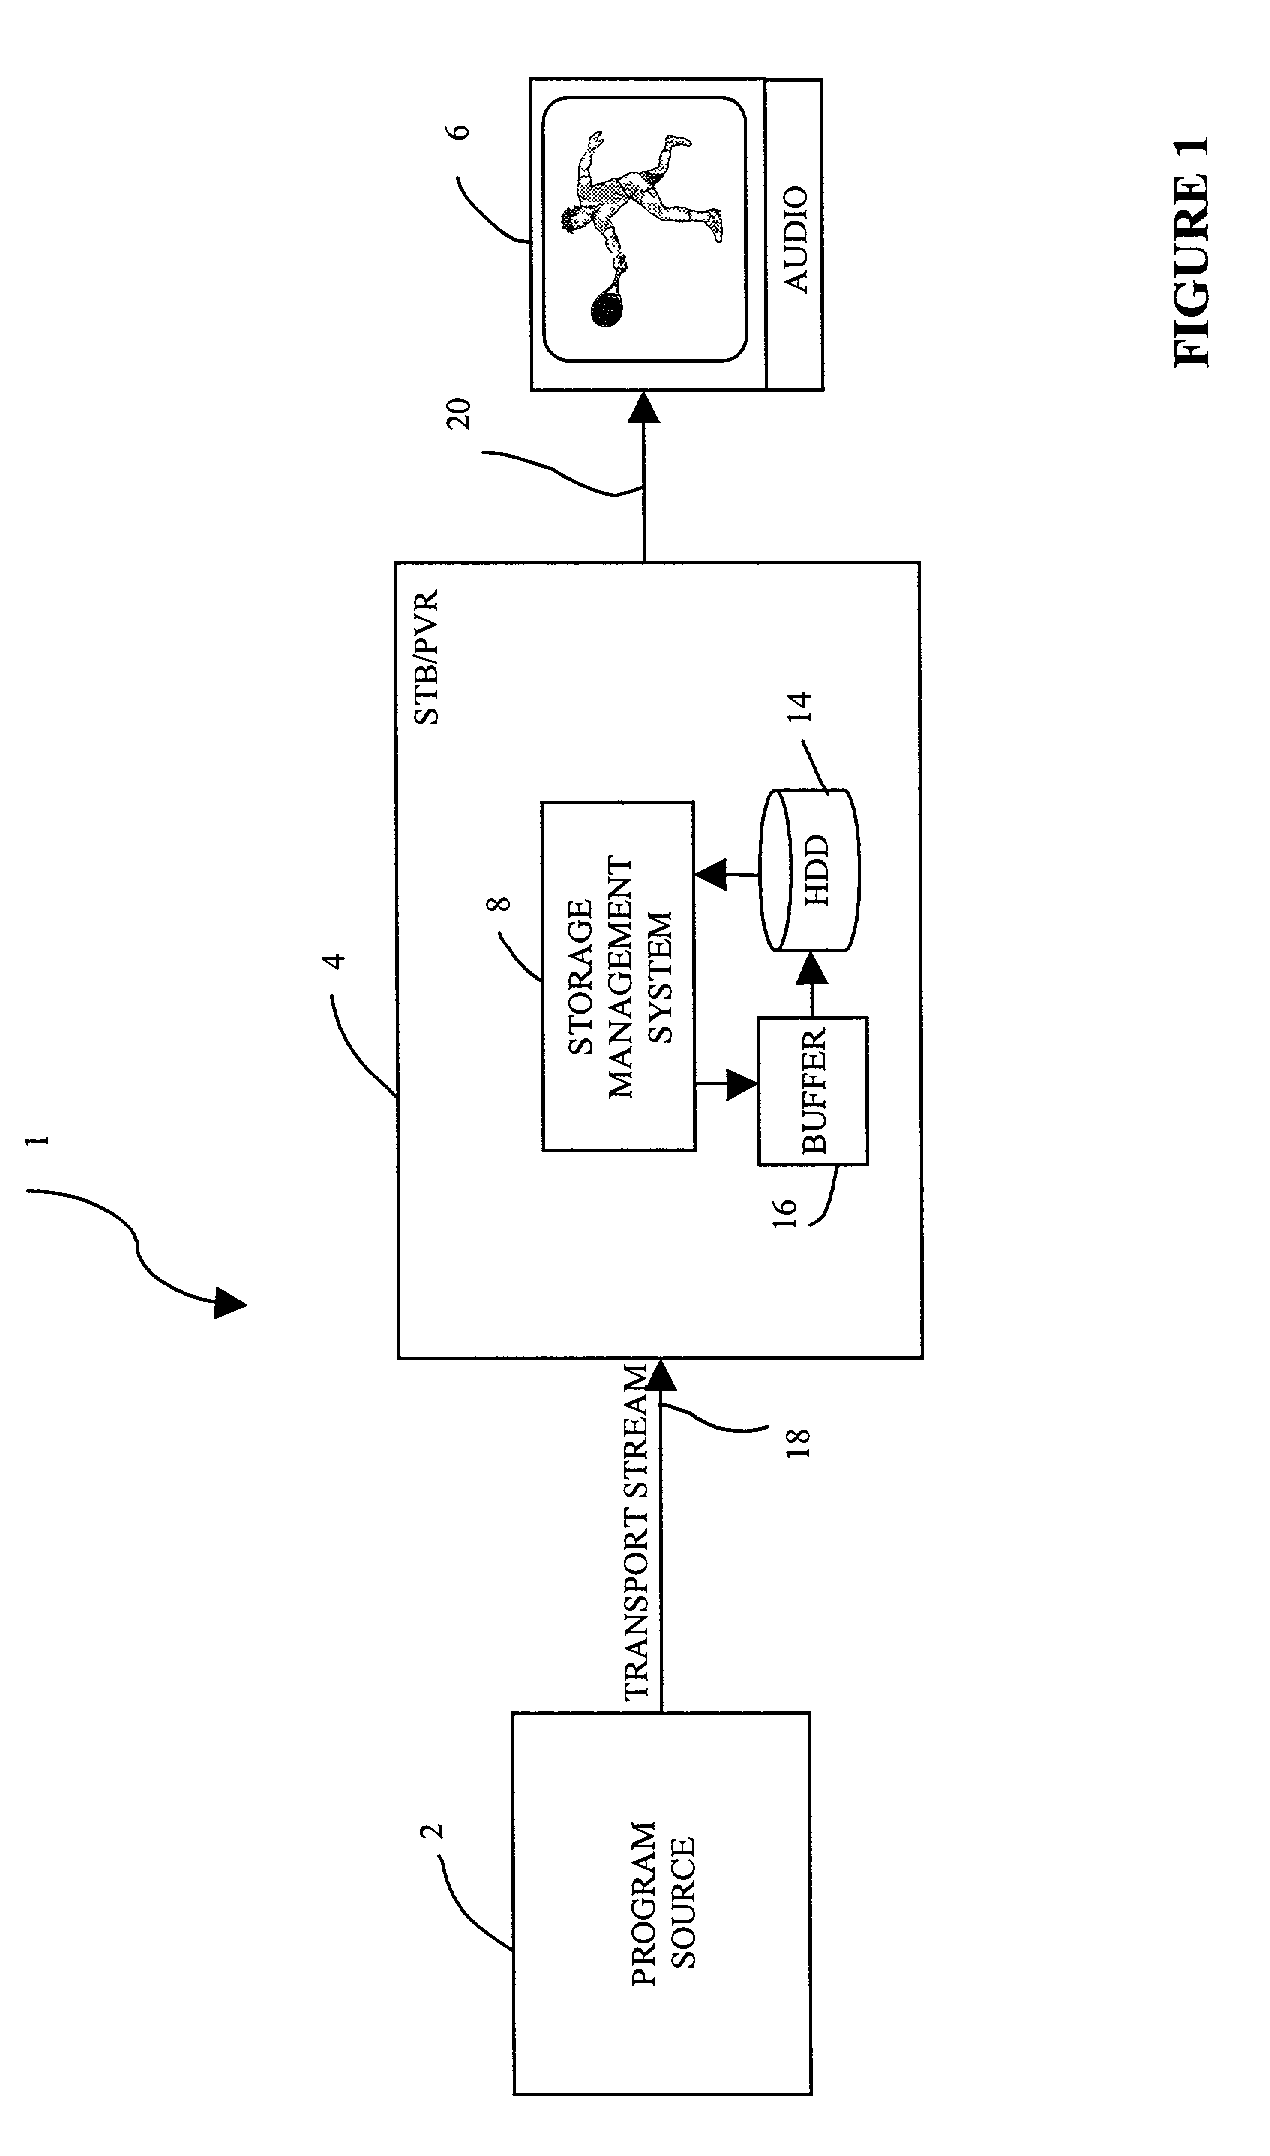 System and a method for storing audio/video programs on a hard disk drive for presentation to a viewer